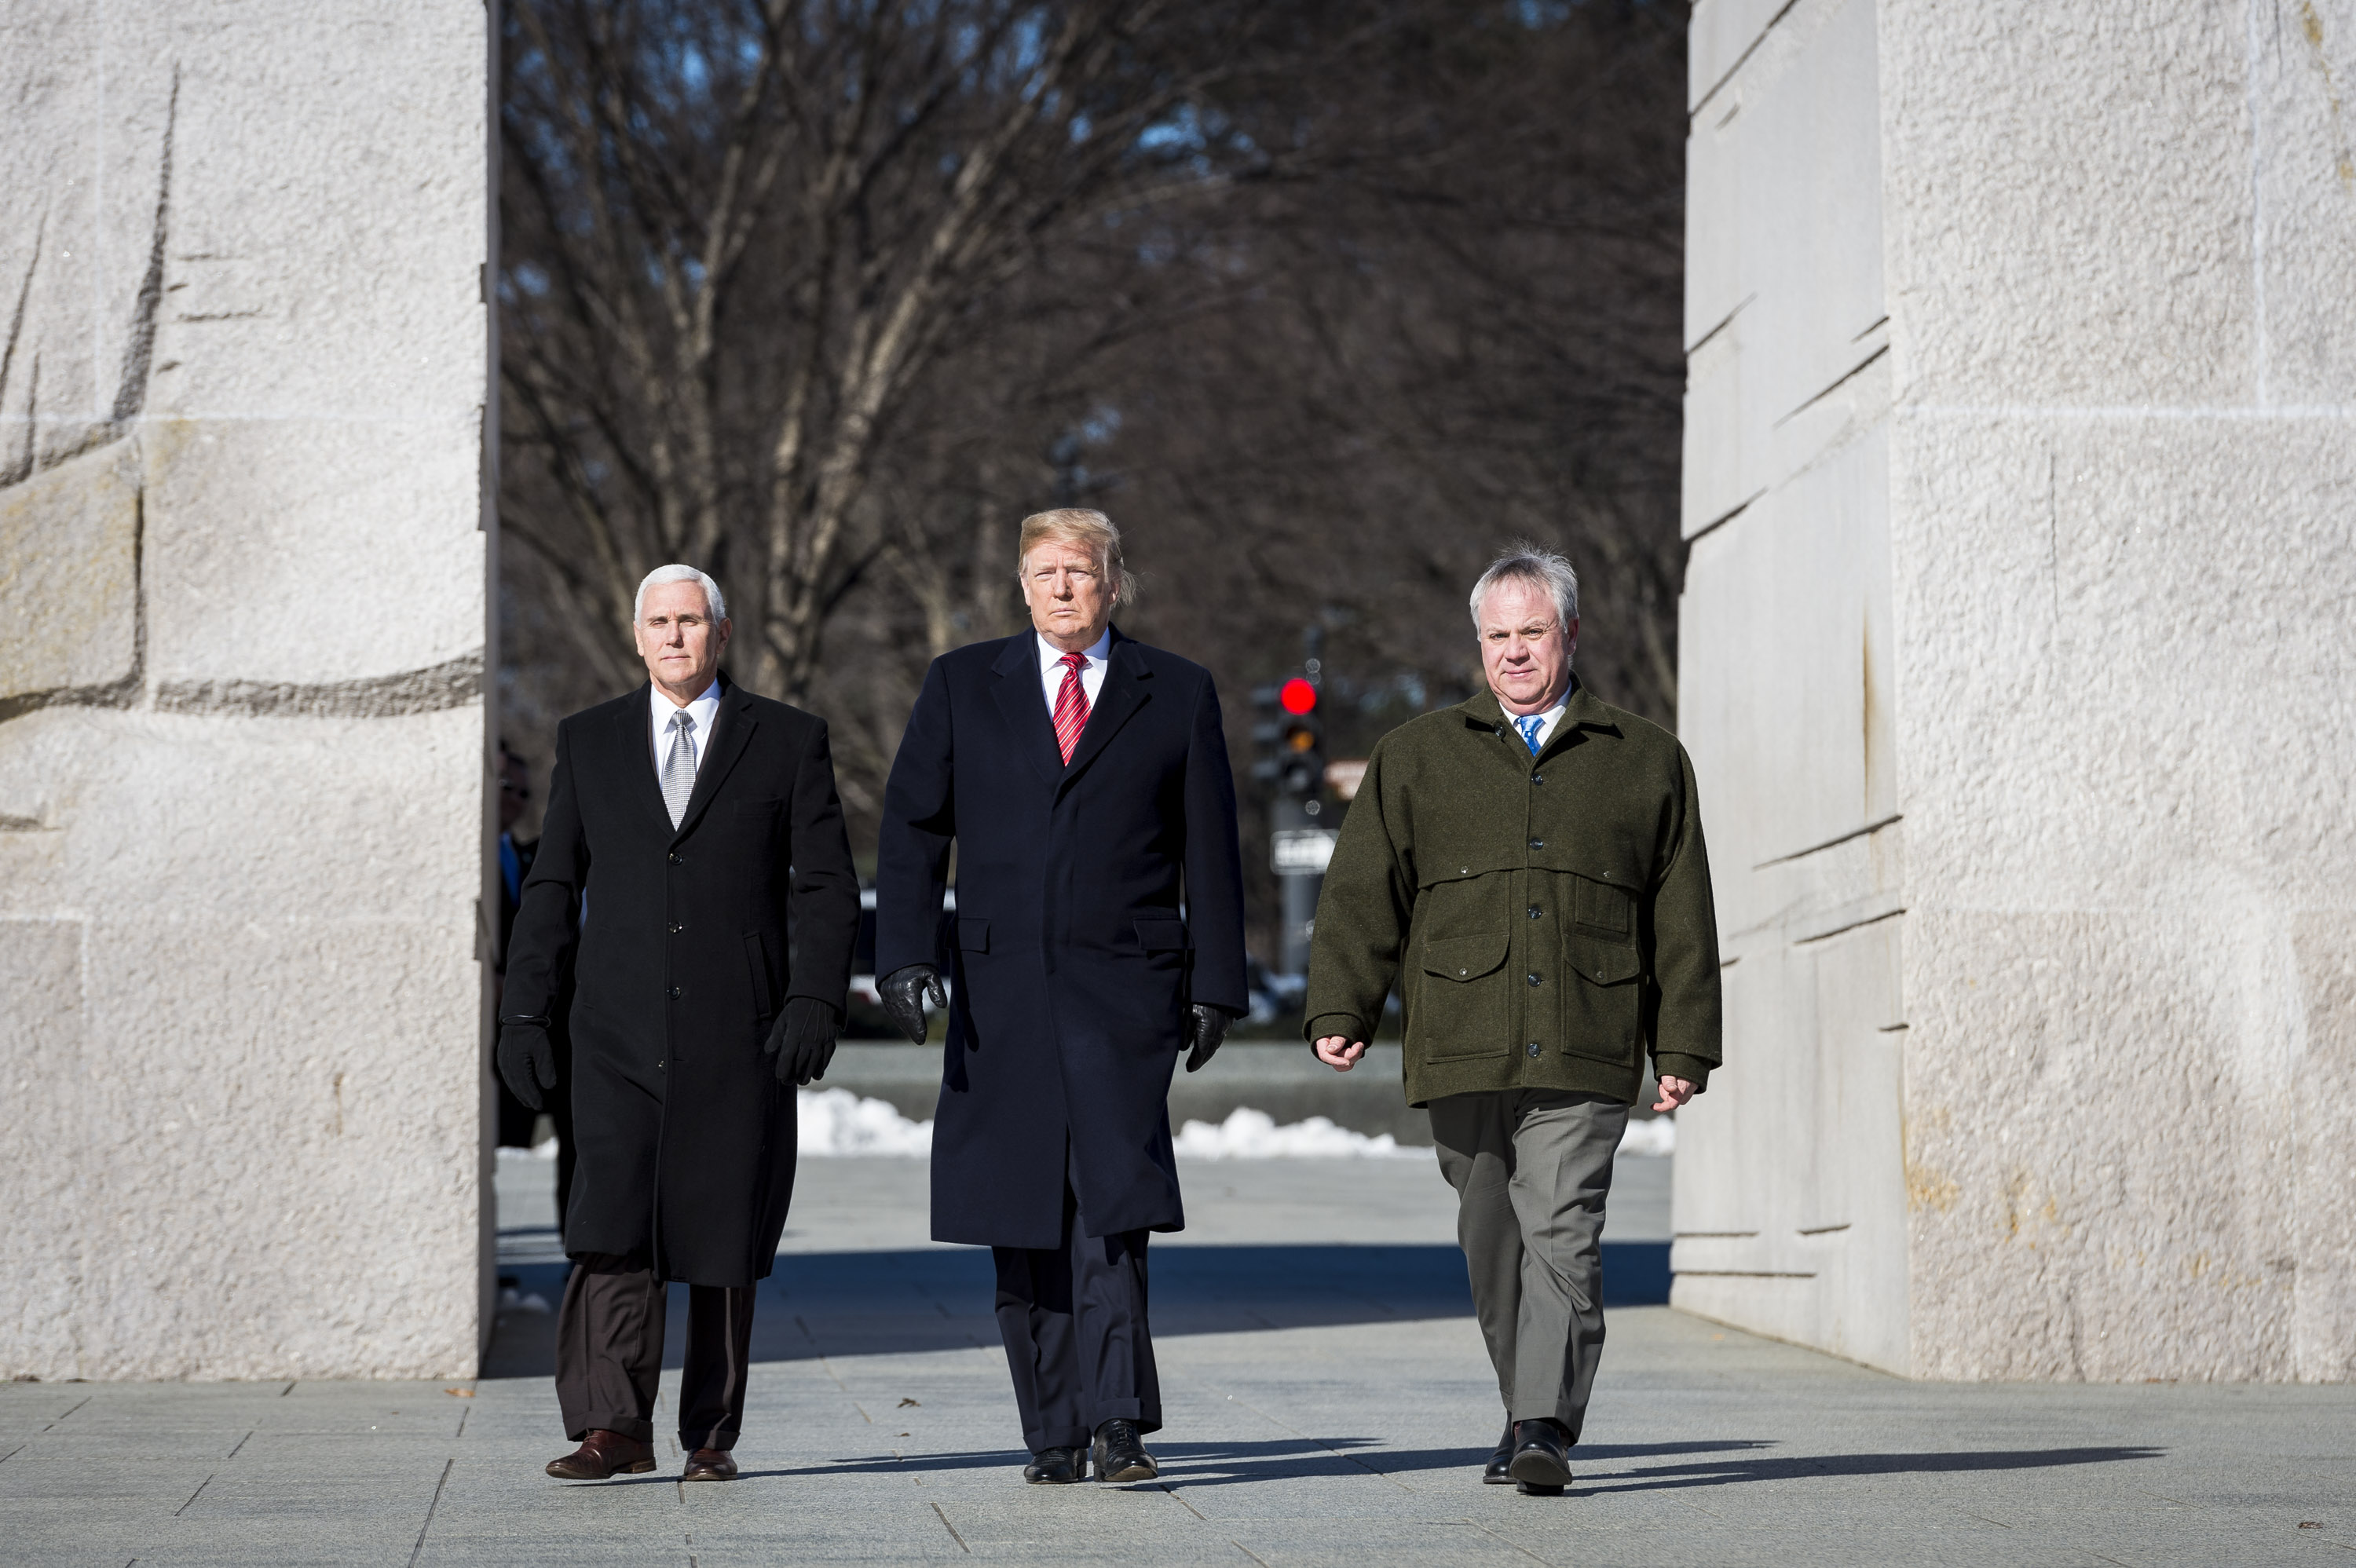 WASHINGTON, DC - JANUARY 21: President Donald Trump and Vice President Mike Pence visit the Martin Luther King Jr. Memorial on January 21, 2019 in Washington, DC. They placed a wreath to commemorate the slain civil rights leader. (Photo by Pete Marovich/Getty Images)